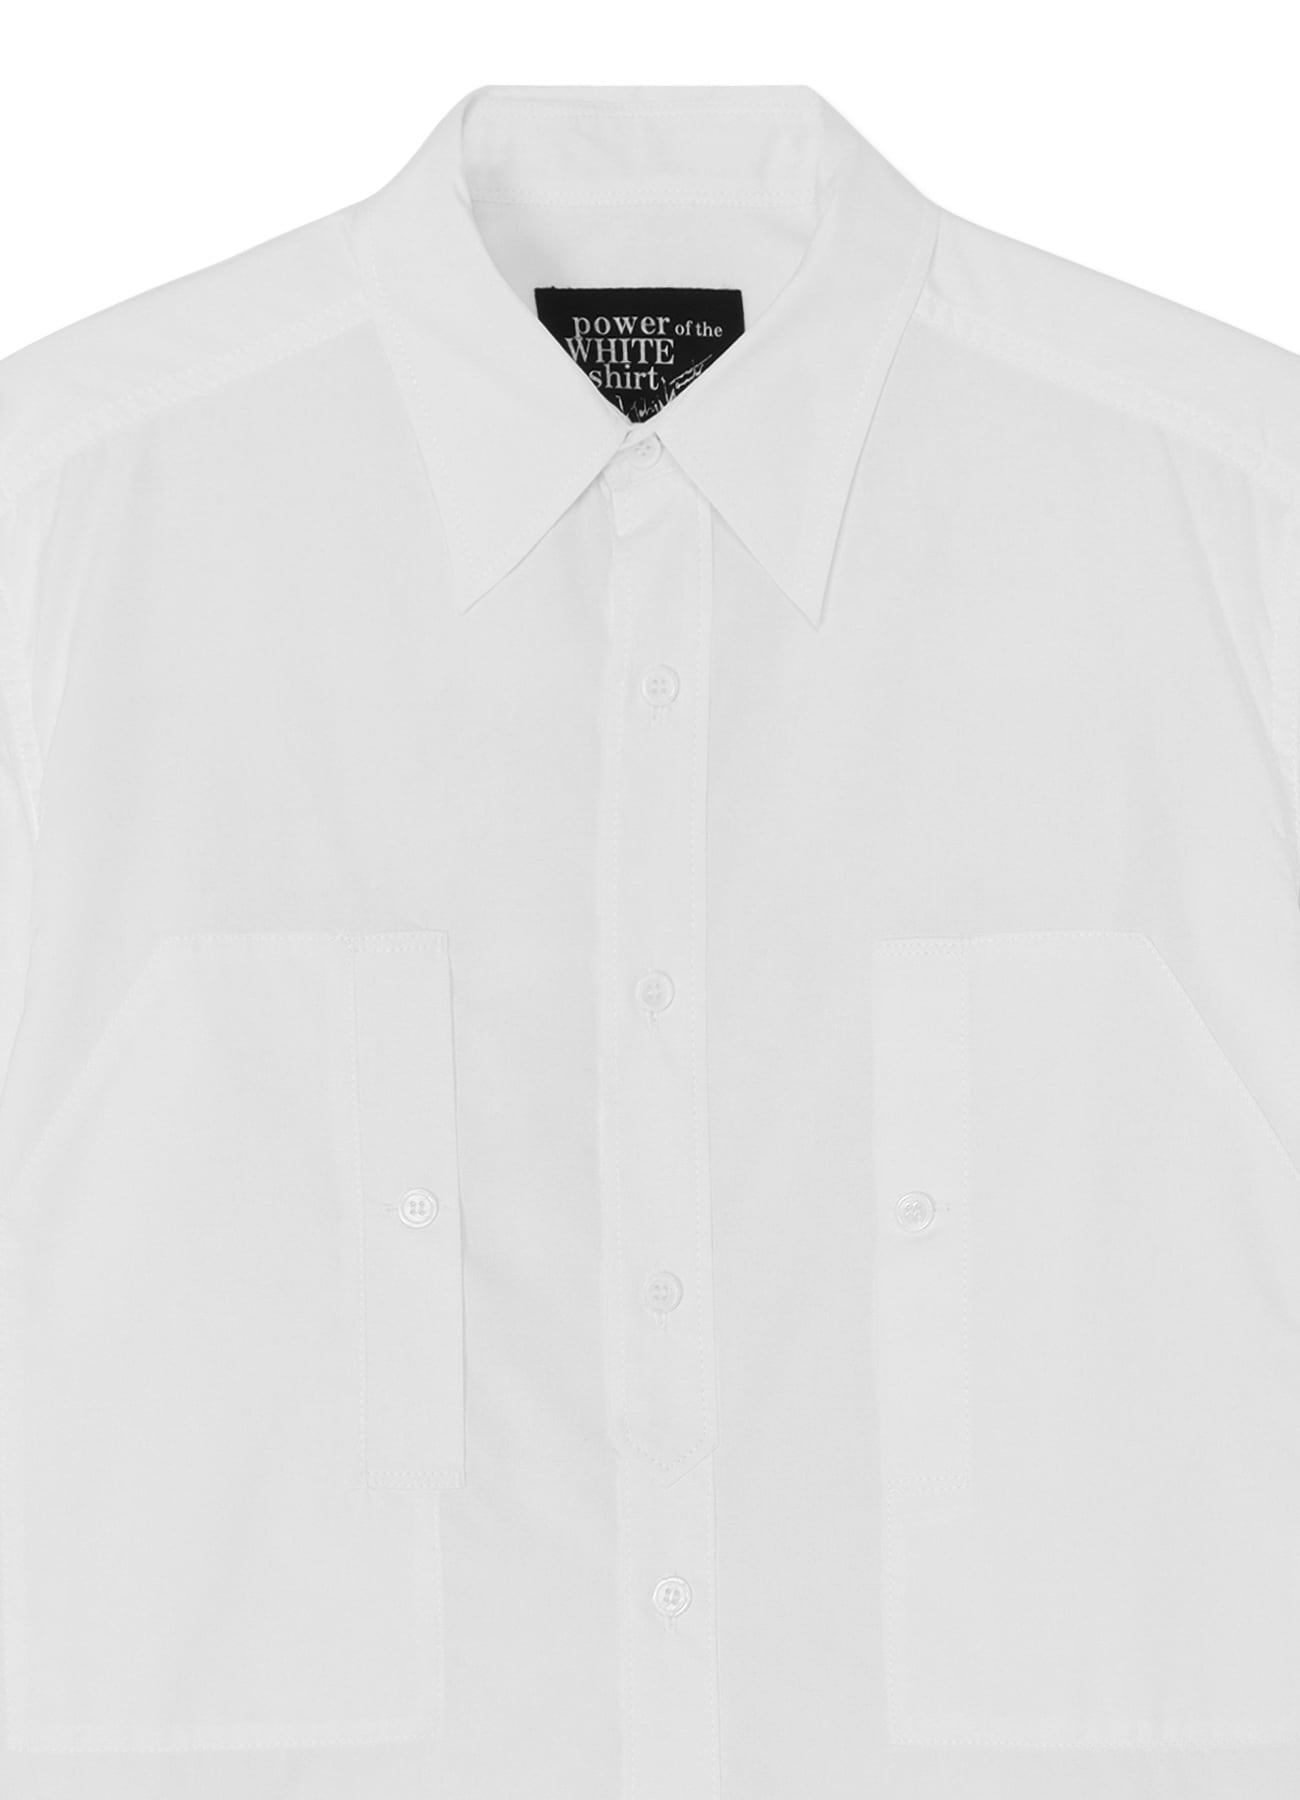 COTTON BROADCLOTH ROUNDED HEM DOUBLE CHEST POCKET SHIRT(S White): power ...